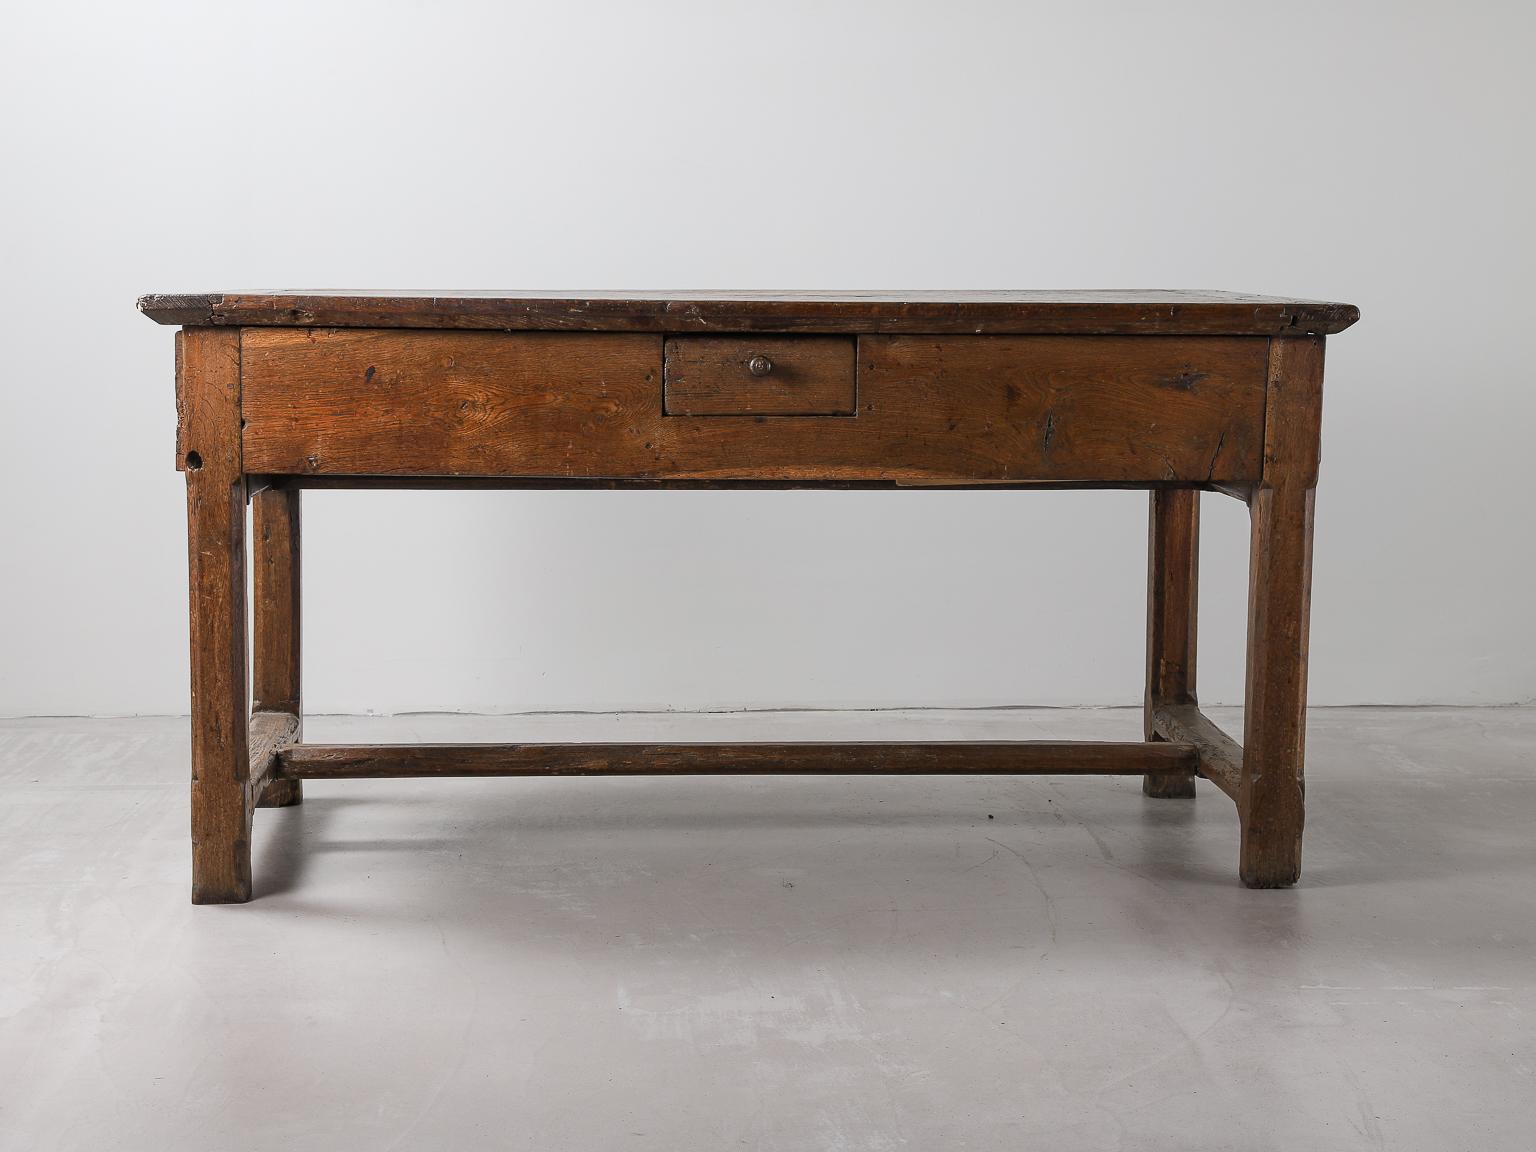 19th century French oak table with centre stretcher. Each end and drawer. Slight wear to the stretchers and top, consistent to the period.